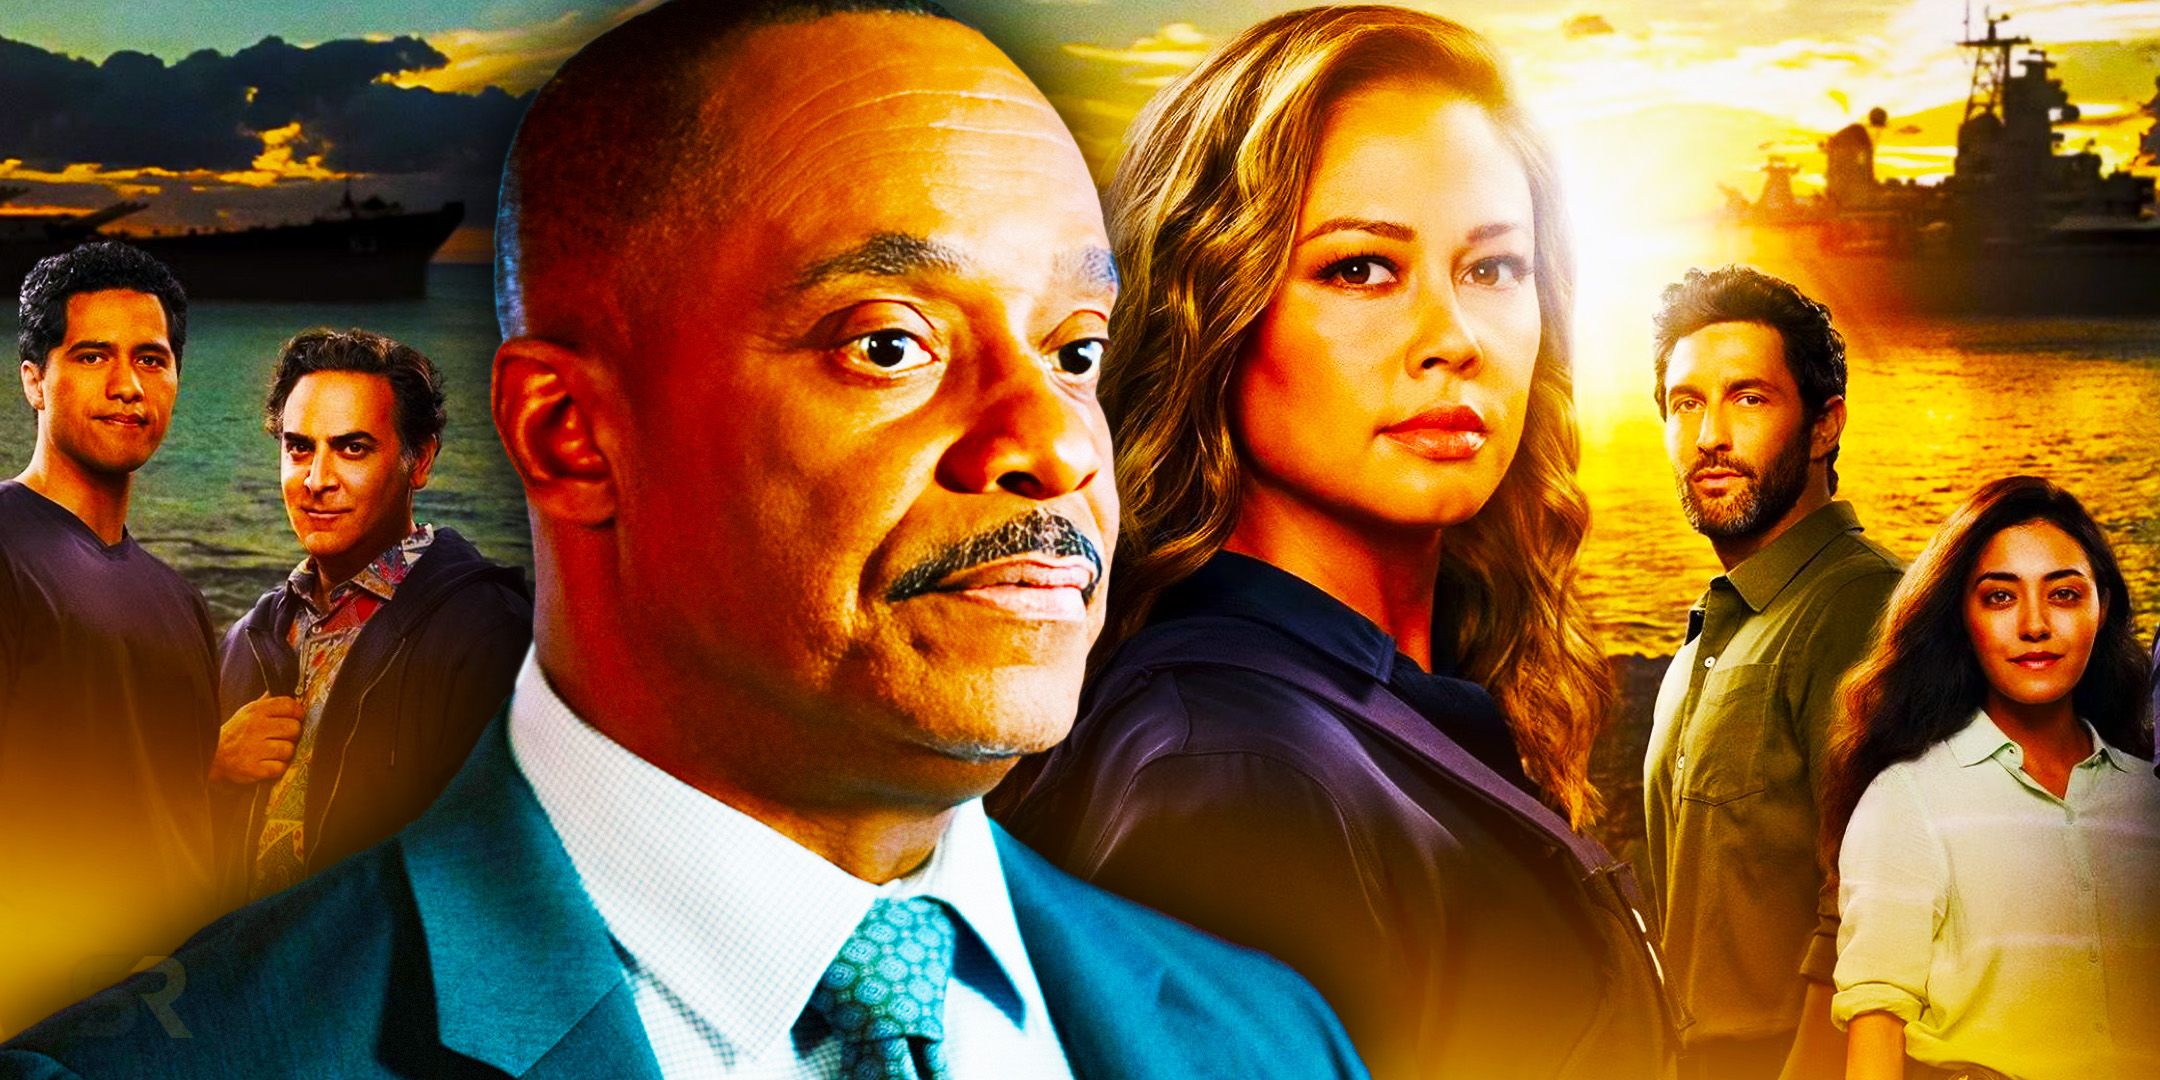 Rocky Carroll as Leon Vance in NCIS and Vanessa Lachey as Jane Tennant in NCIS: Hawai'i.